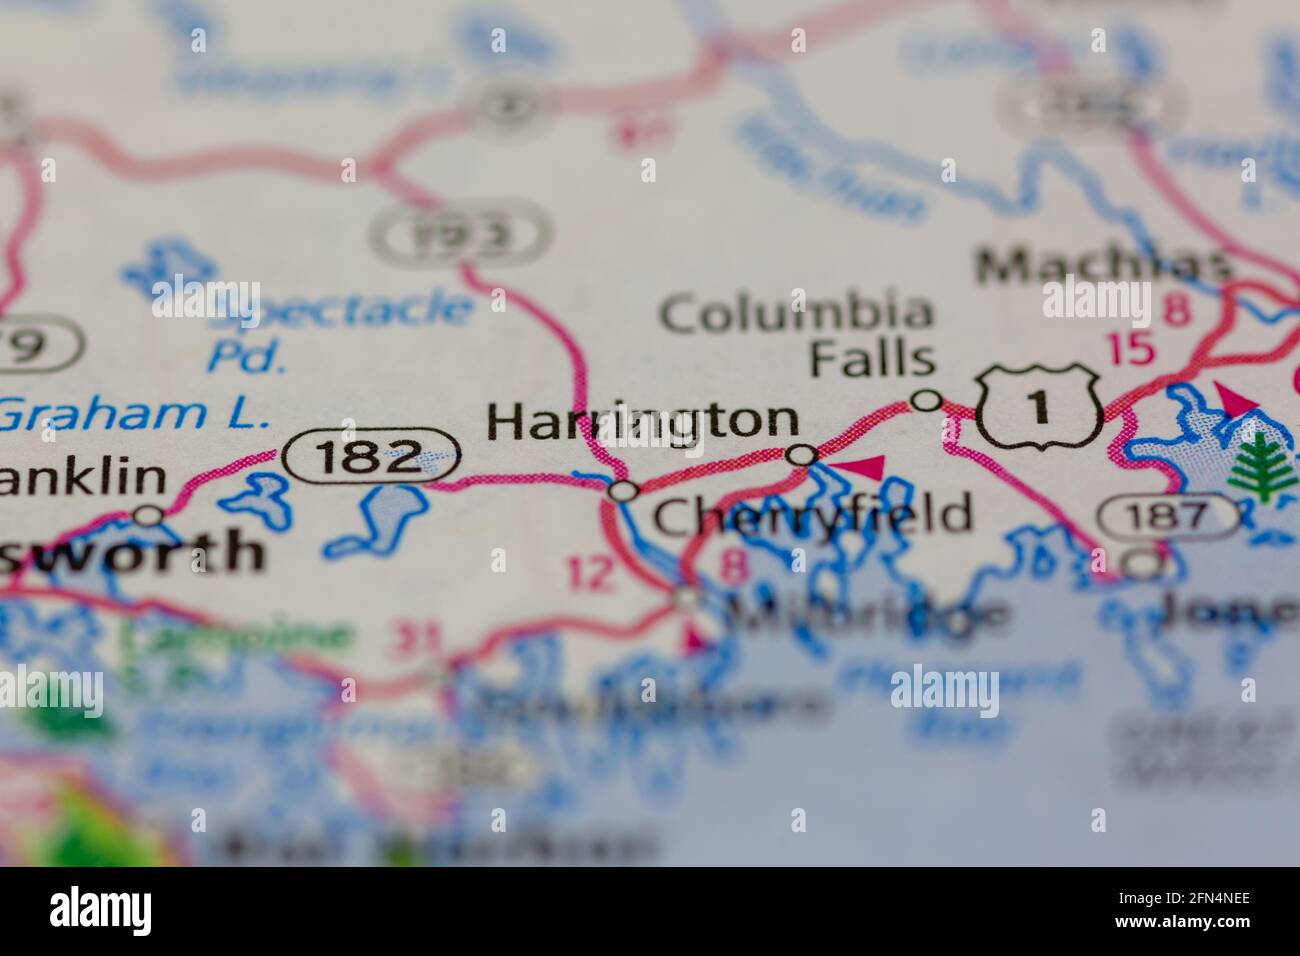 Harrington Maine USA shown on a Geography map or road map Stock Photo